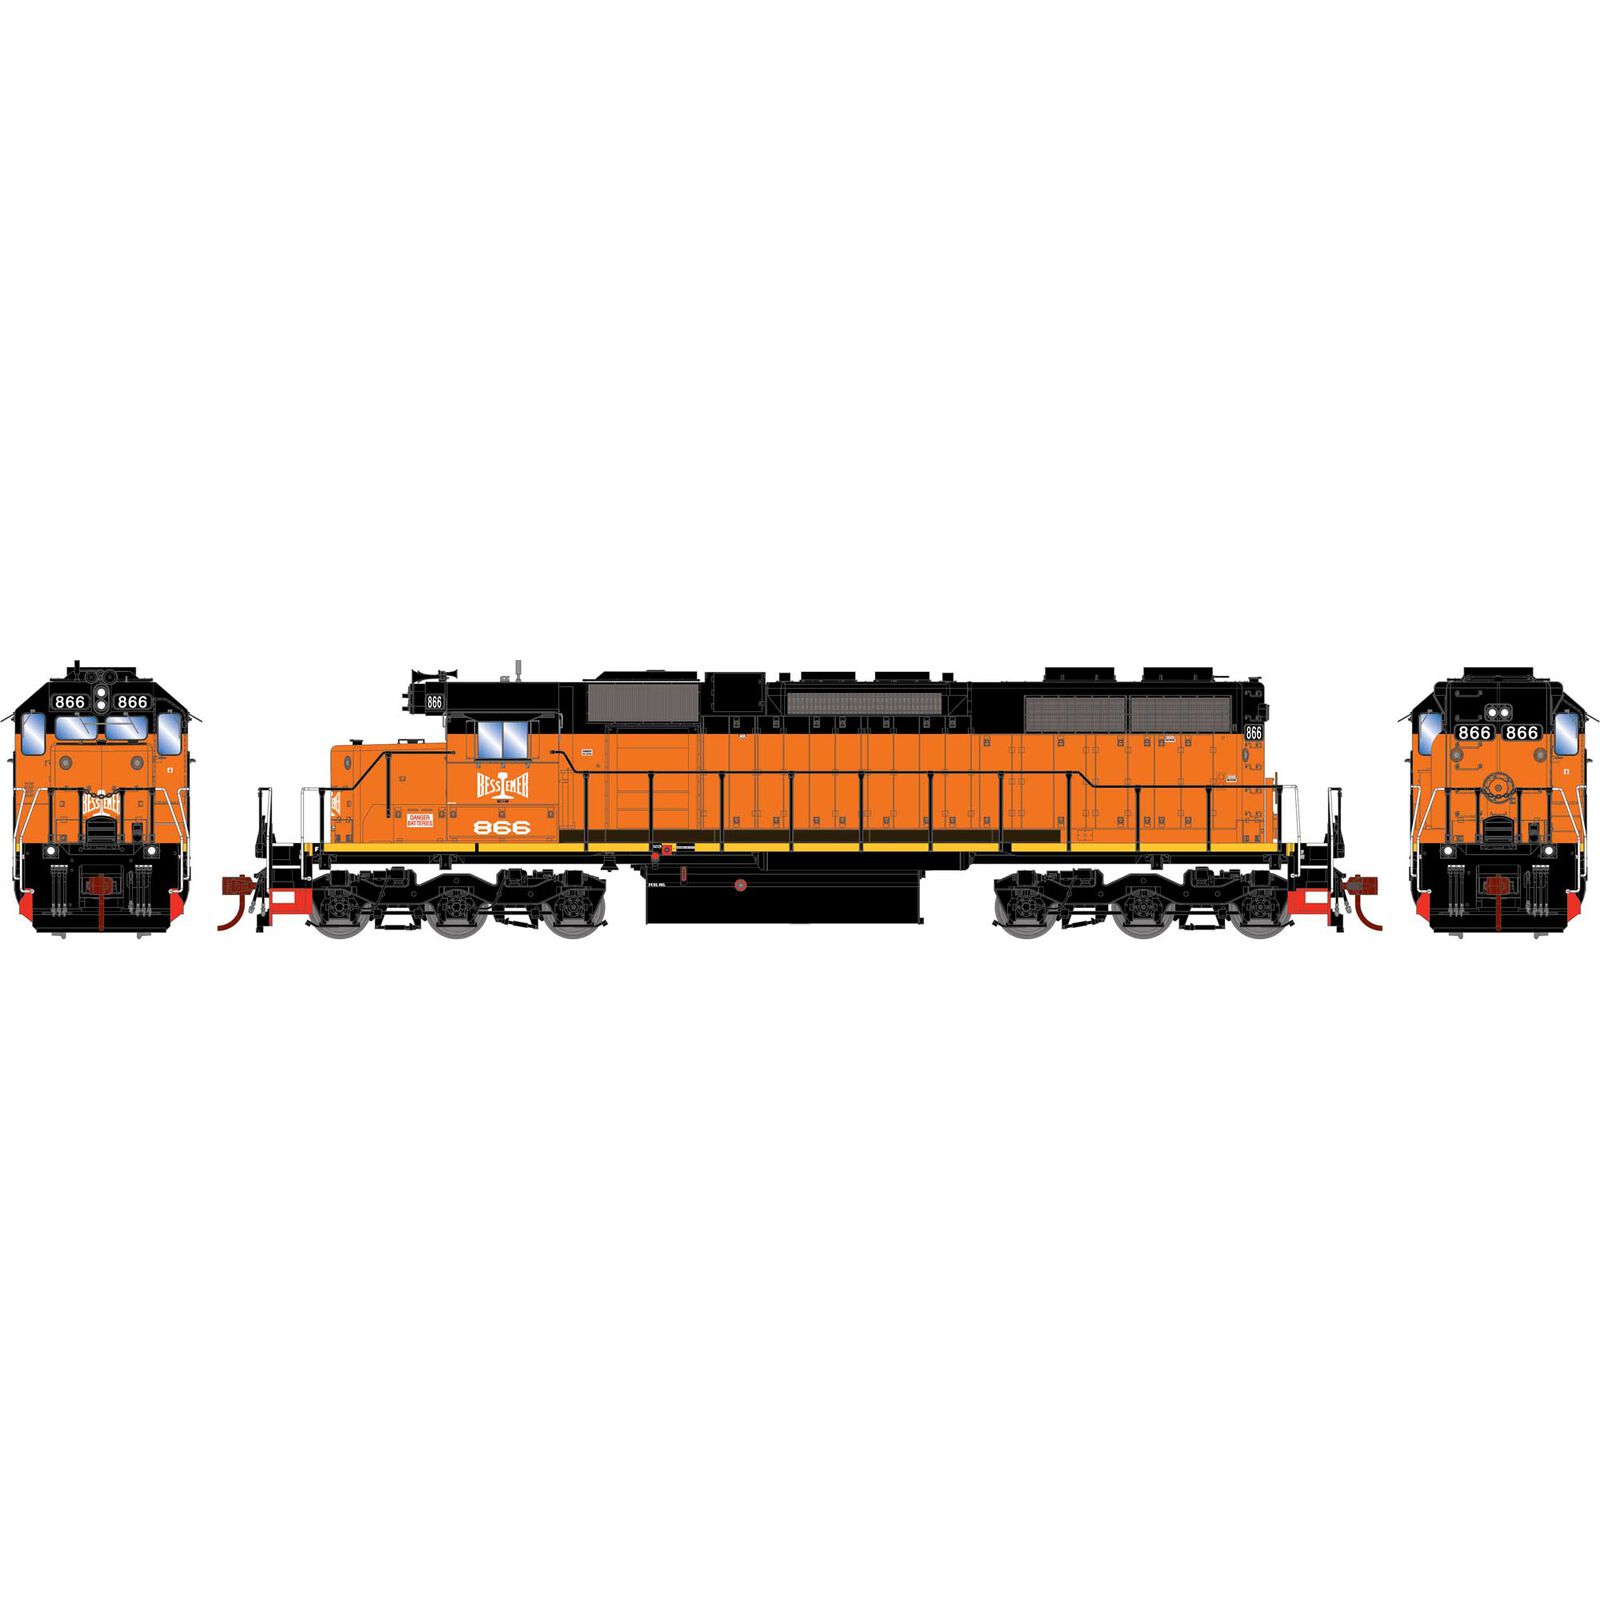 HO RTR SD38 with DCC & Sound, B&LE #866